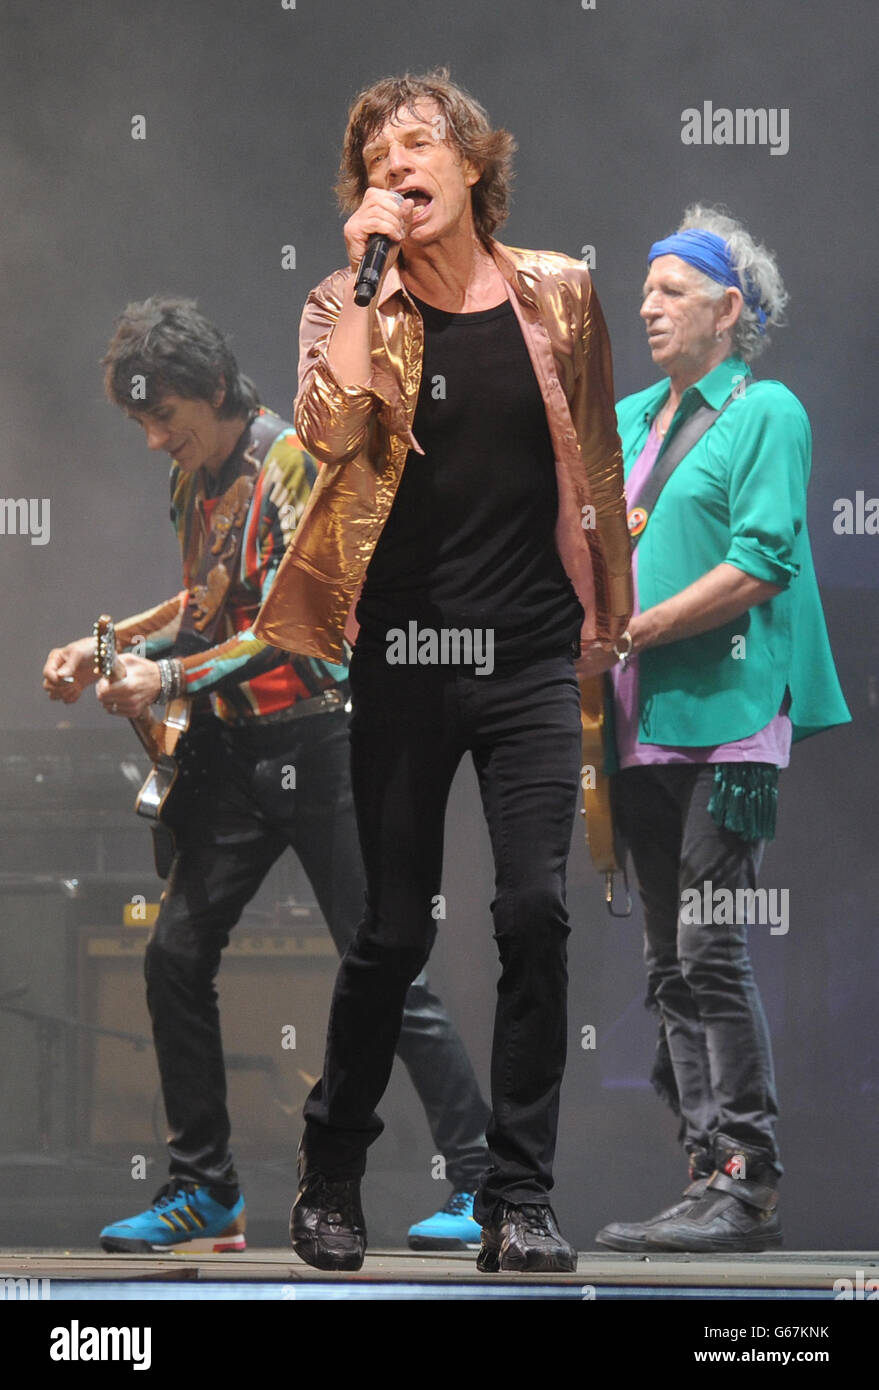 Mick Jagger (centre), Keith Richards (right) and Ronnie Wood (left), of the Rolling Stones, perform on the Pyramid Stage during the Glastonbury 2013 Festival at Pilton Farm, Somerset. Stock Photo